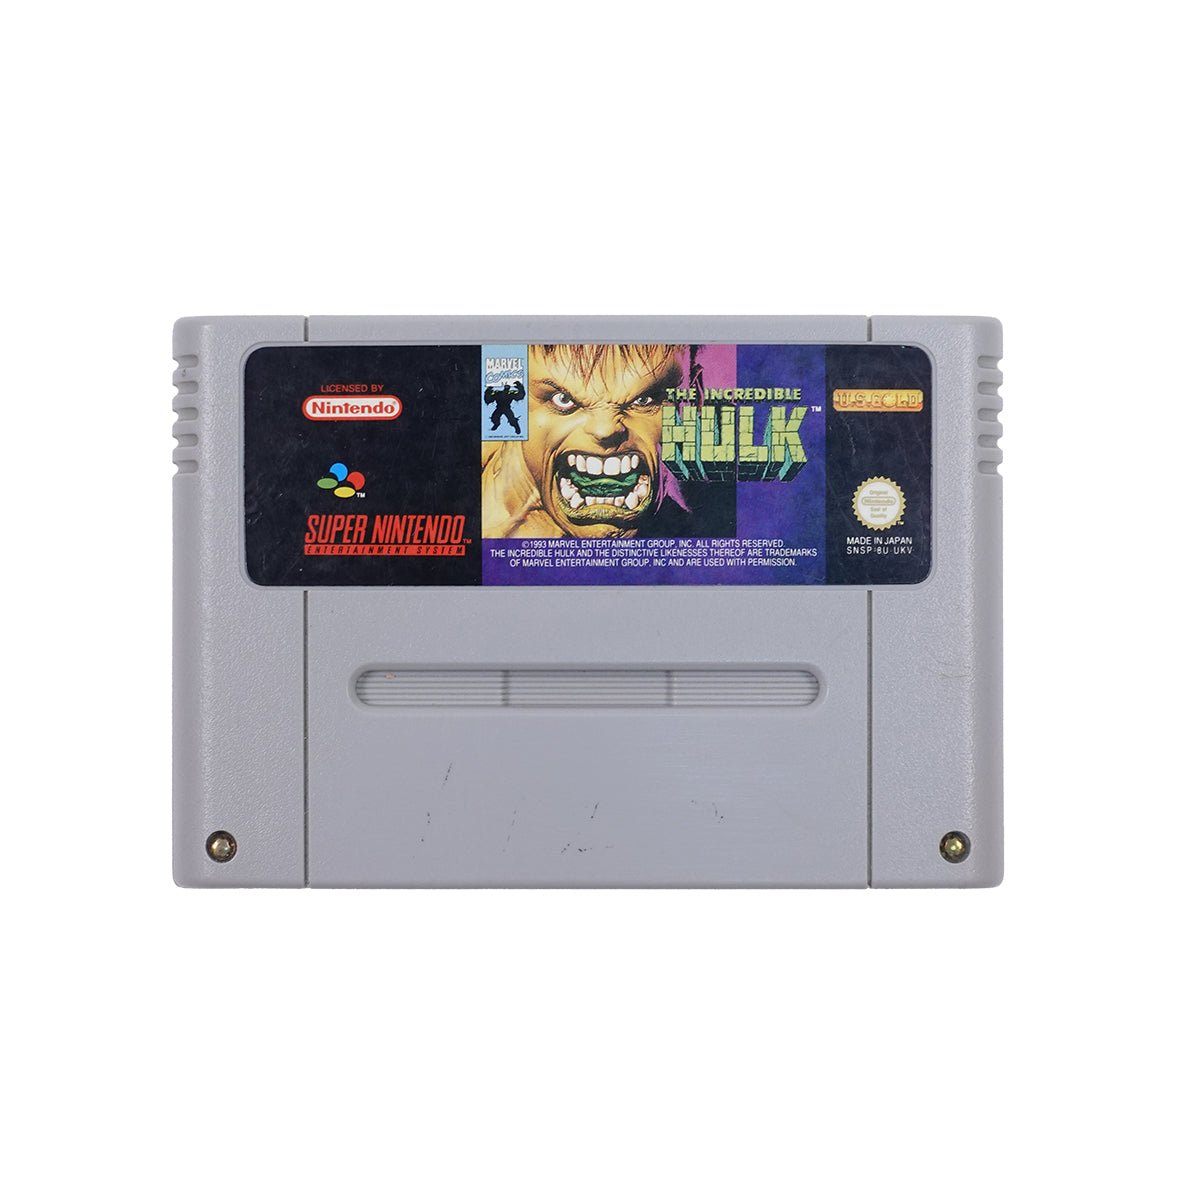 (Pre-Owned) The incredible hulk - Super Nintendo Entertainment System - Store 974 | ستور ٩٧٤